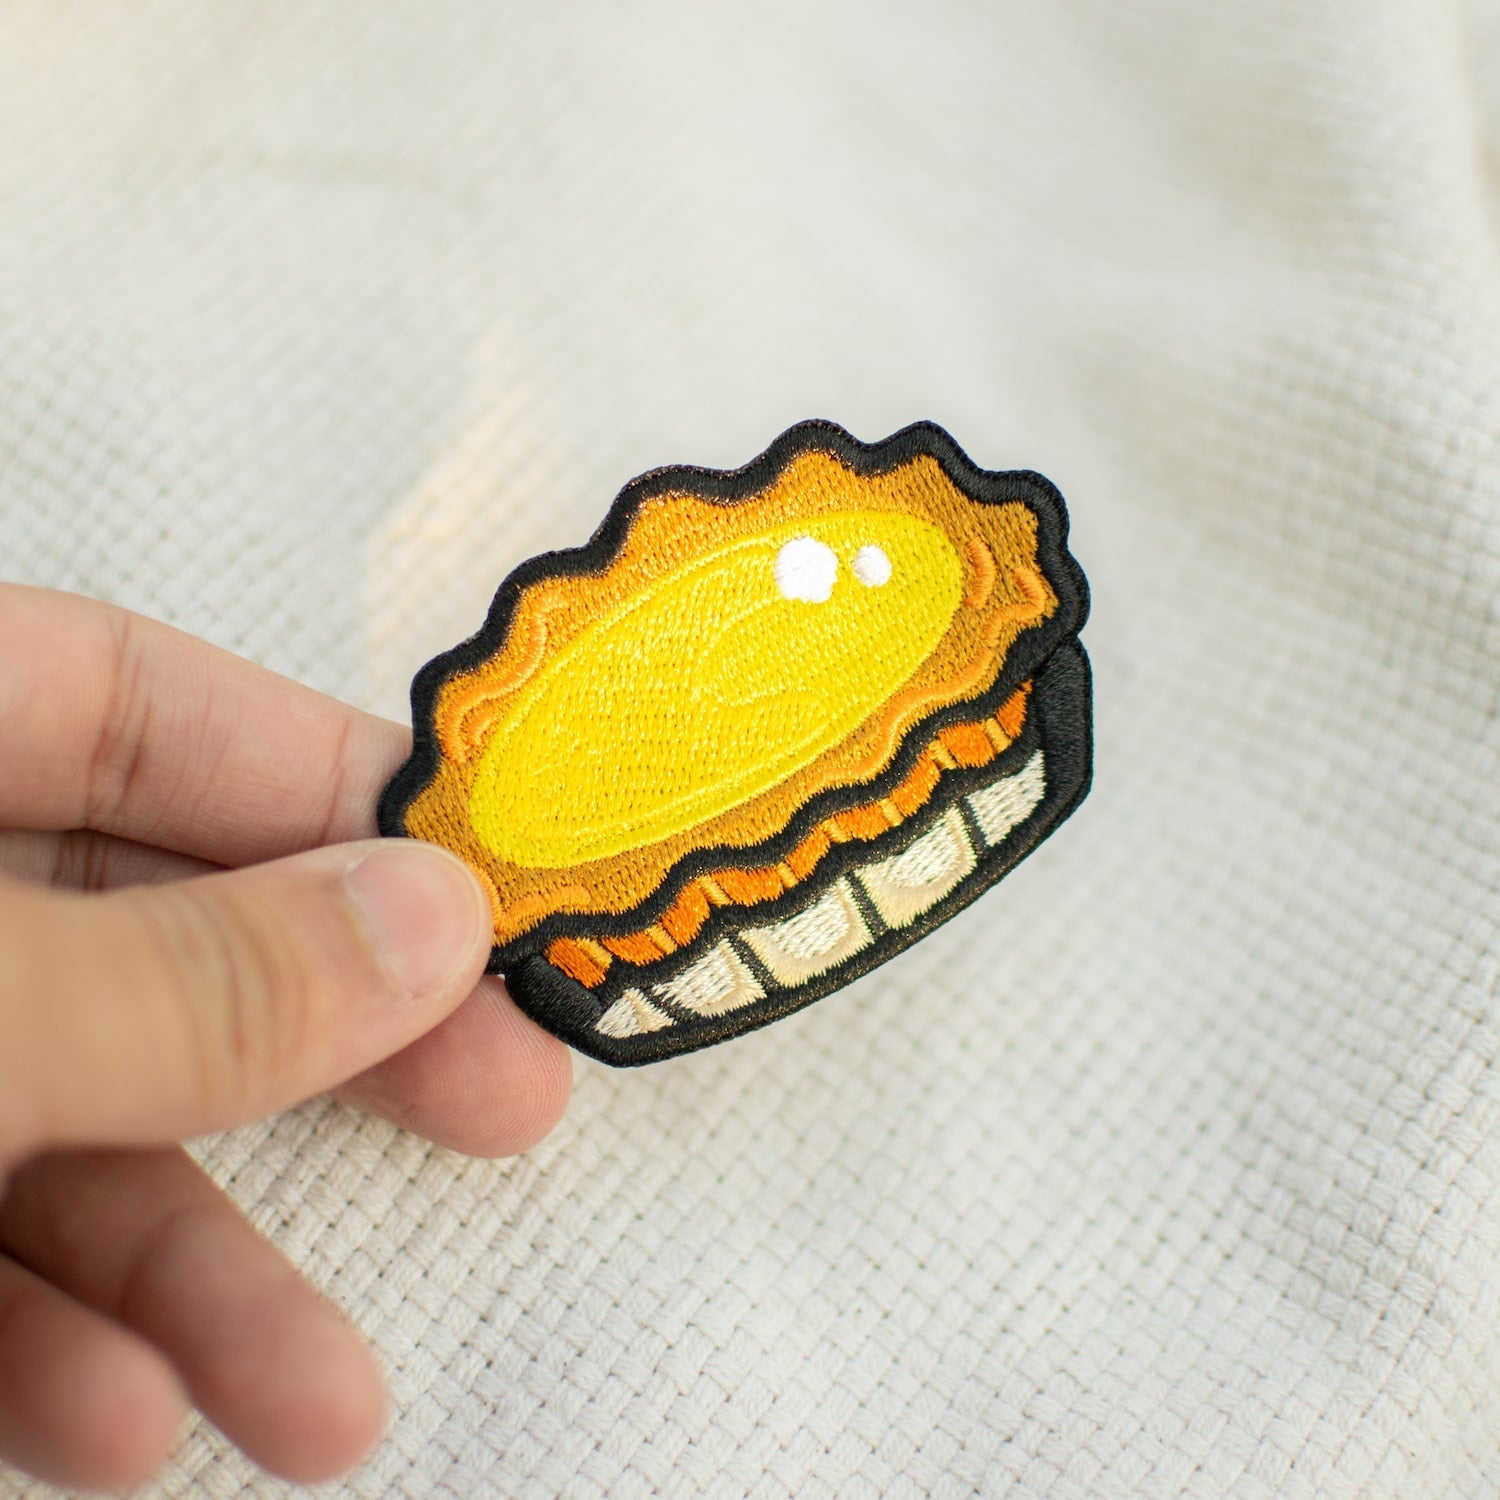 Egg Tart Embroidered Patch - Ni De Mama Chinese Clothing